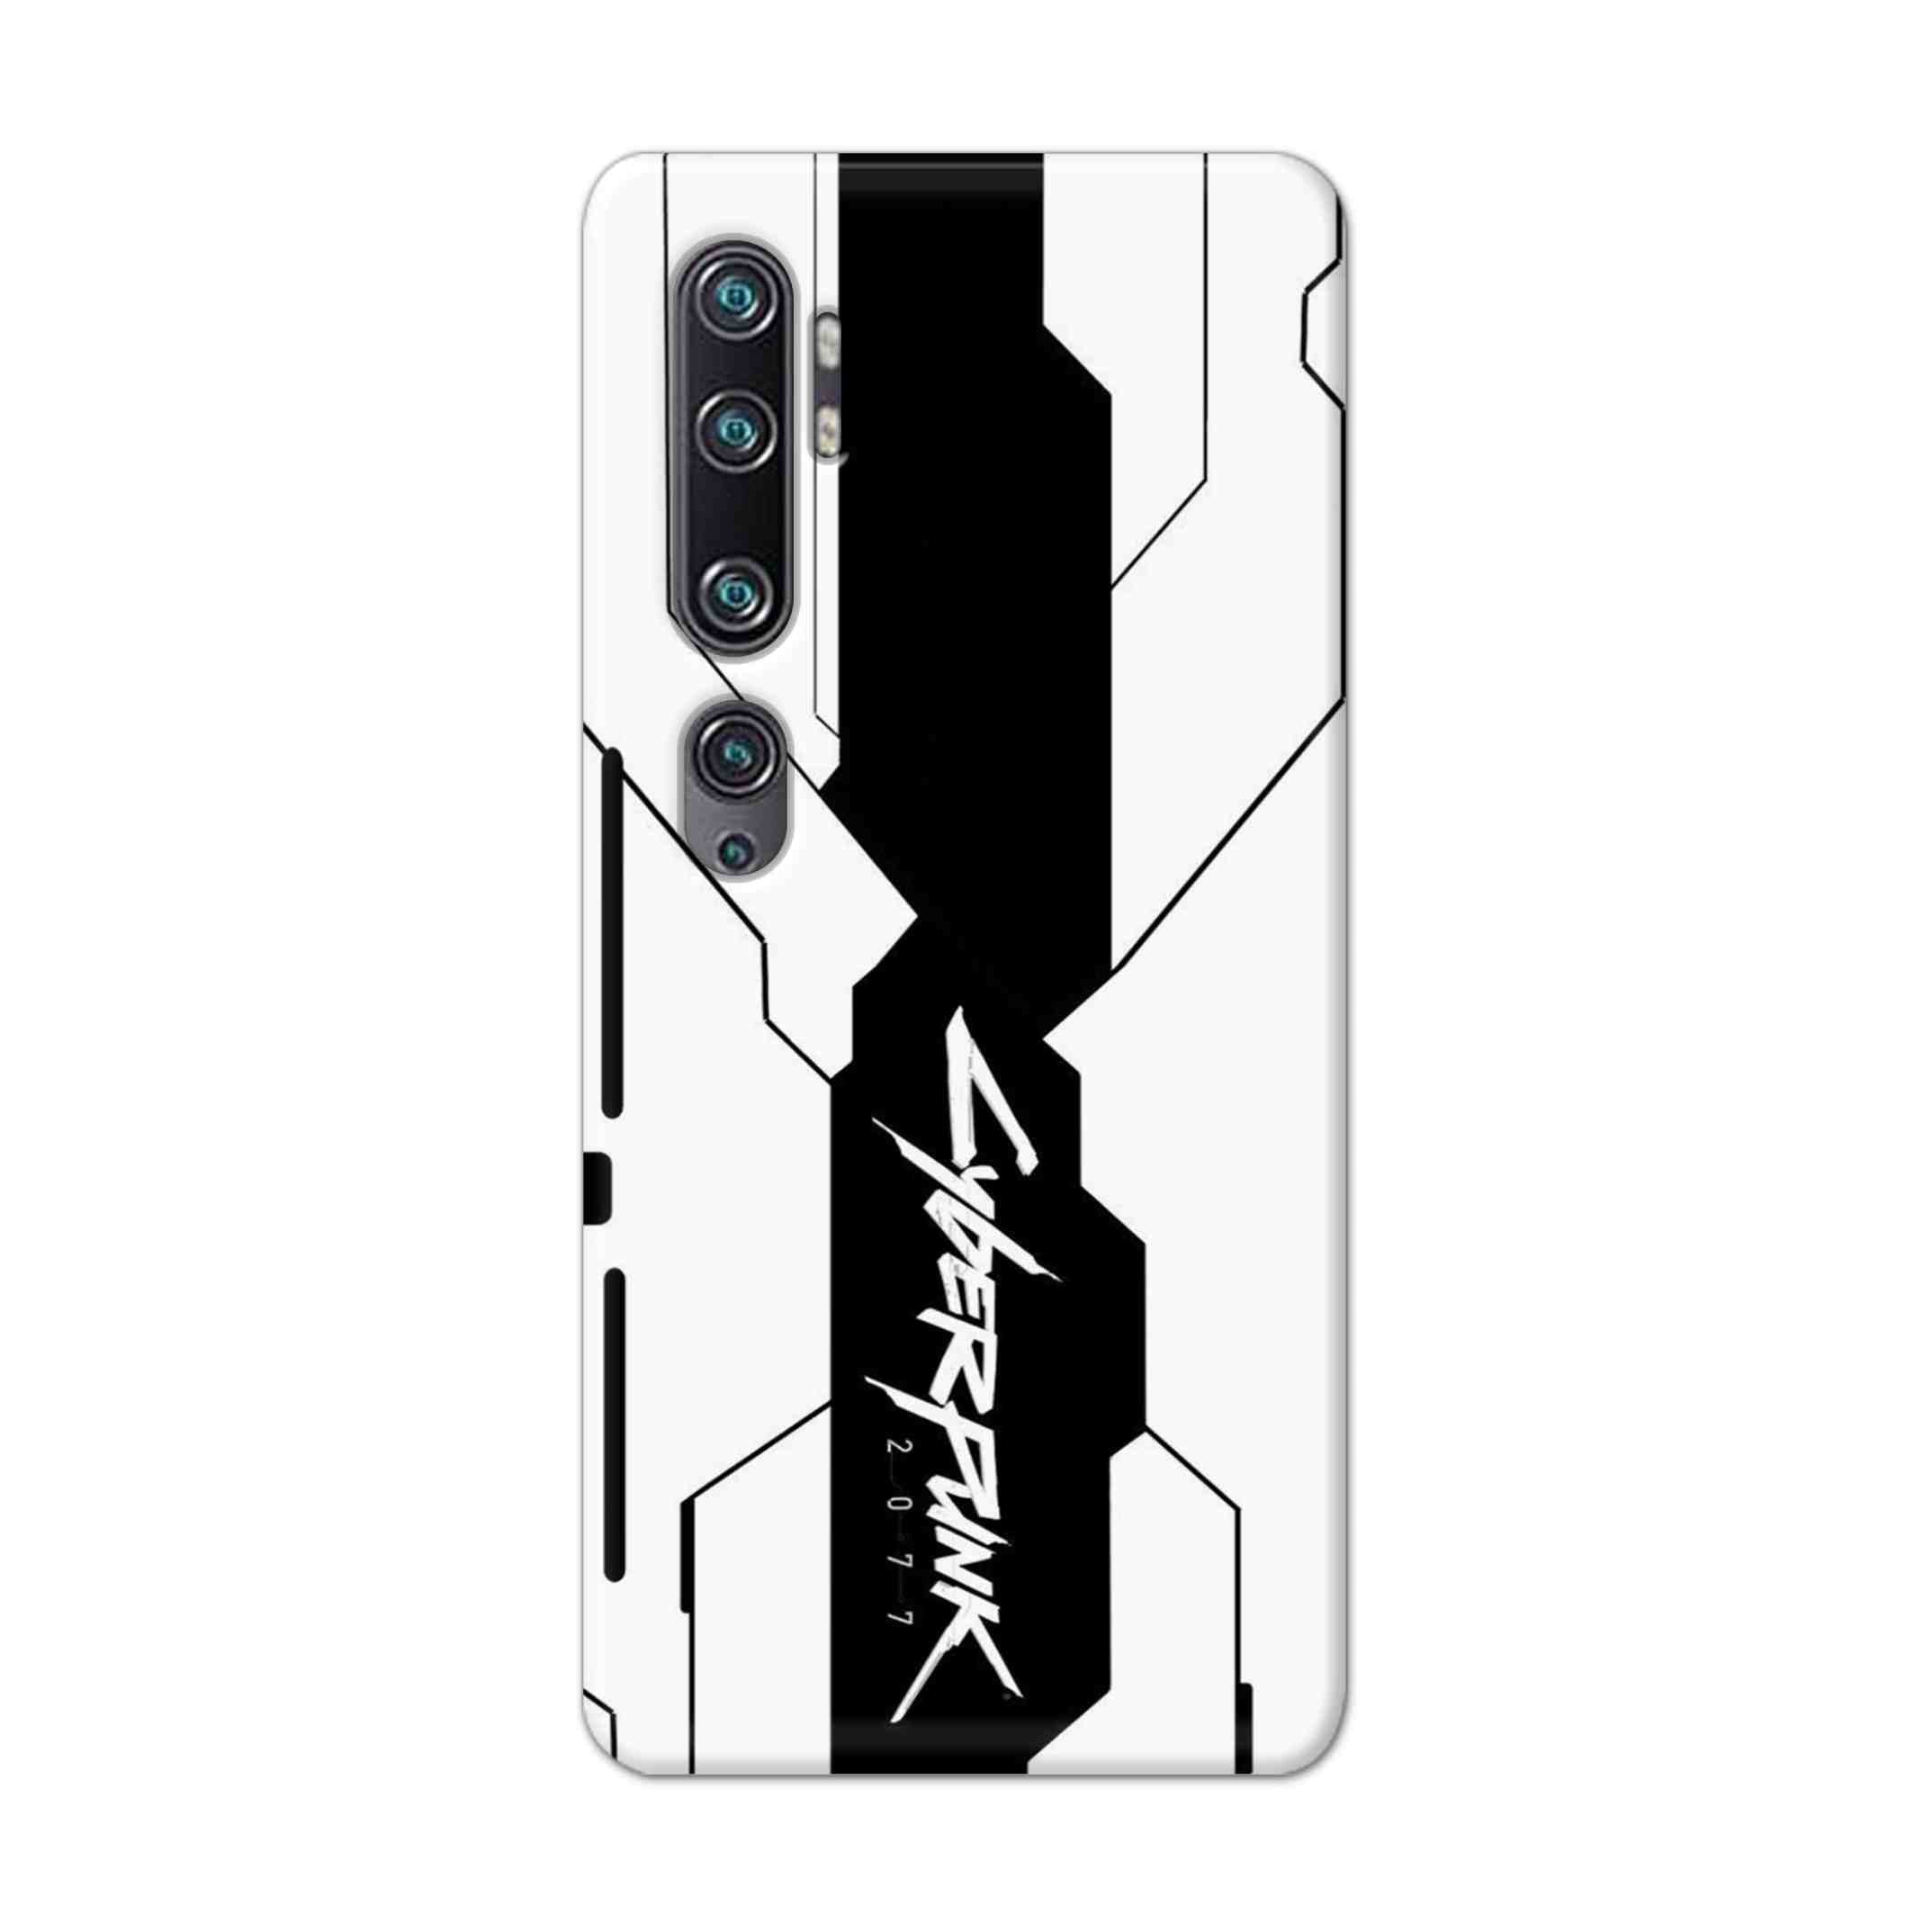 Buy Cyberpunk 2077 Hard Back Mobile Phone Case Cover For Xiaomi Mi Note 10 Online